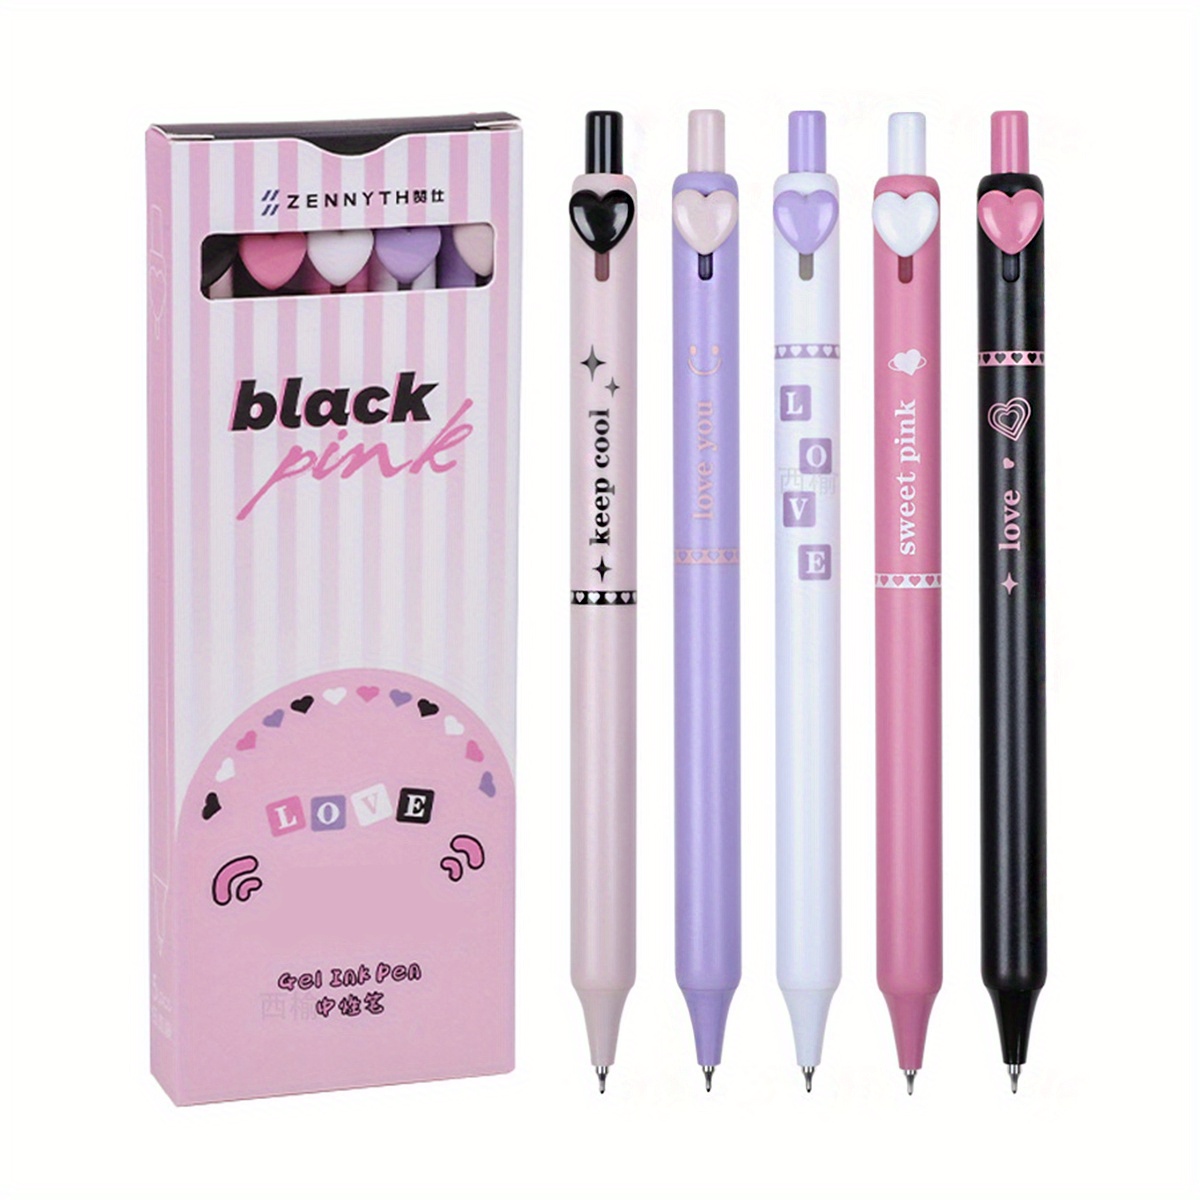 Set Of 5 Adorable Gel Pens, Lovely Writing Instrument, Retractable Gel Pen,  0.5mm Fast-drying Black Ink Pen, Fine Tip For Smooth Writing, Charming Pen,  Supplies For Office And School, Perfect For Back